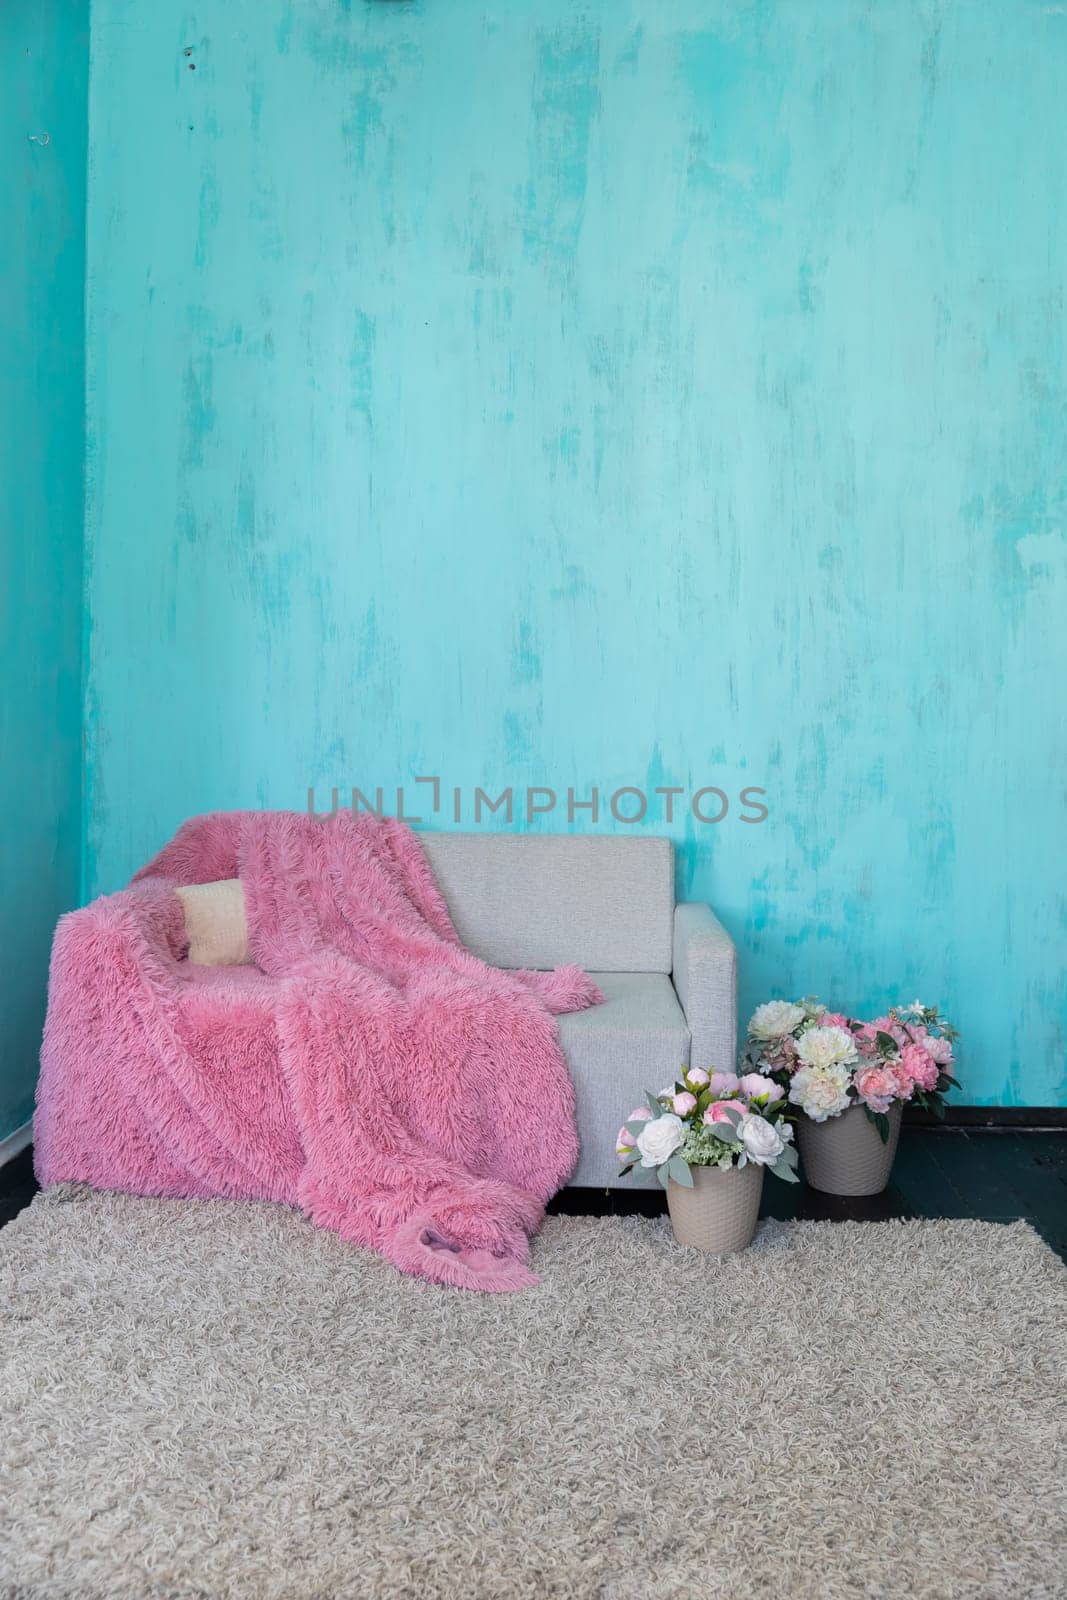 sofa with pink blanket and flowers in blue room